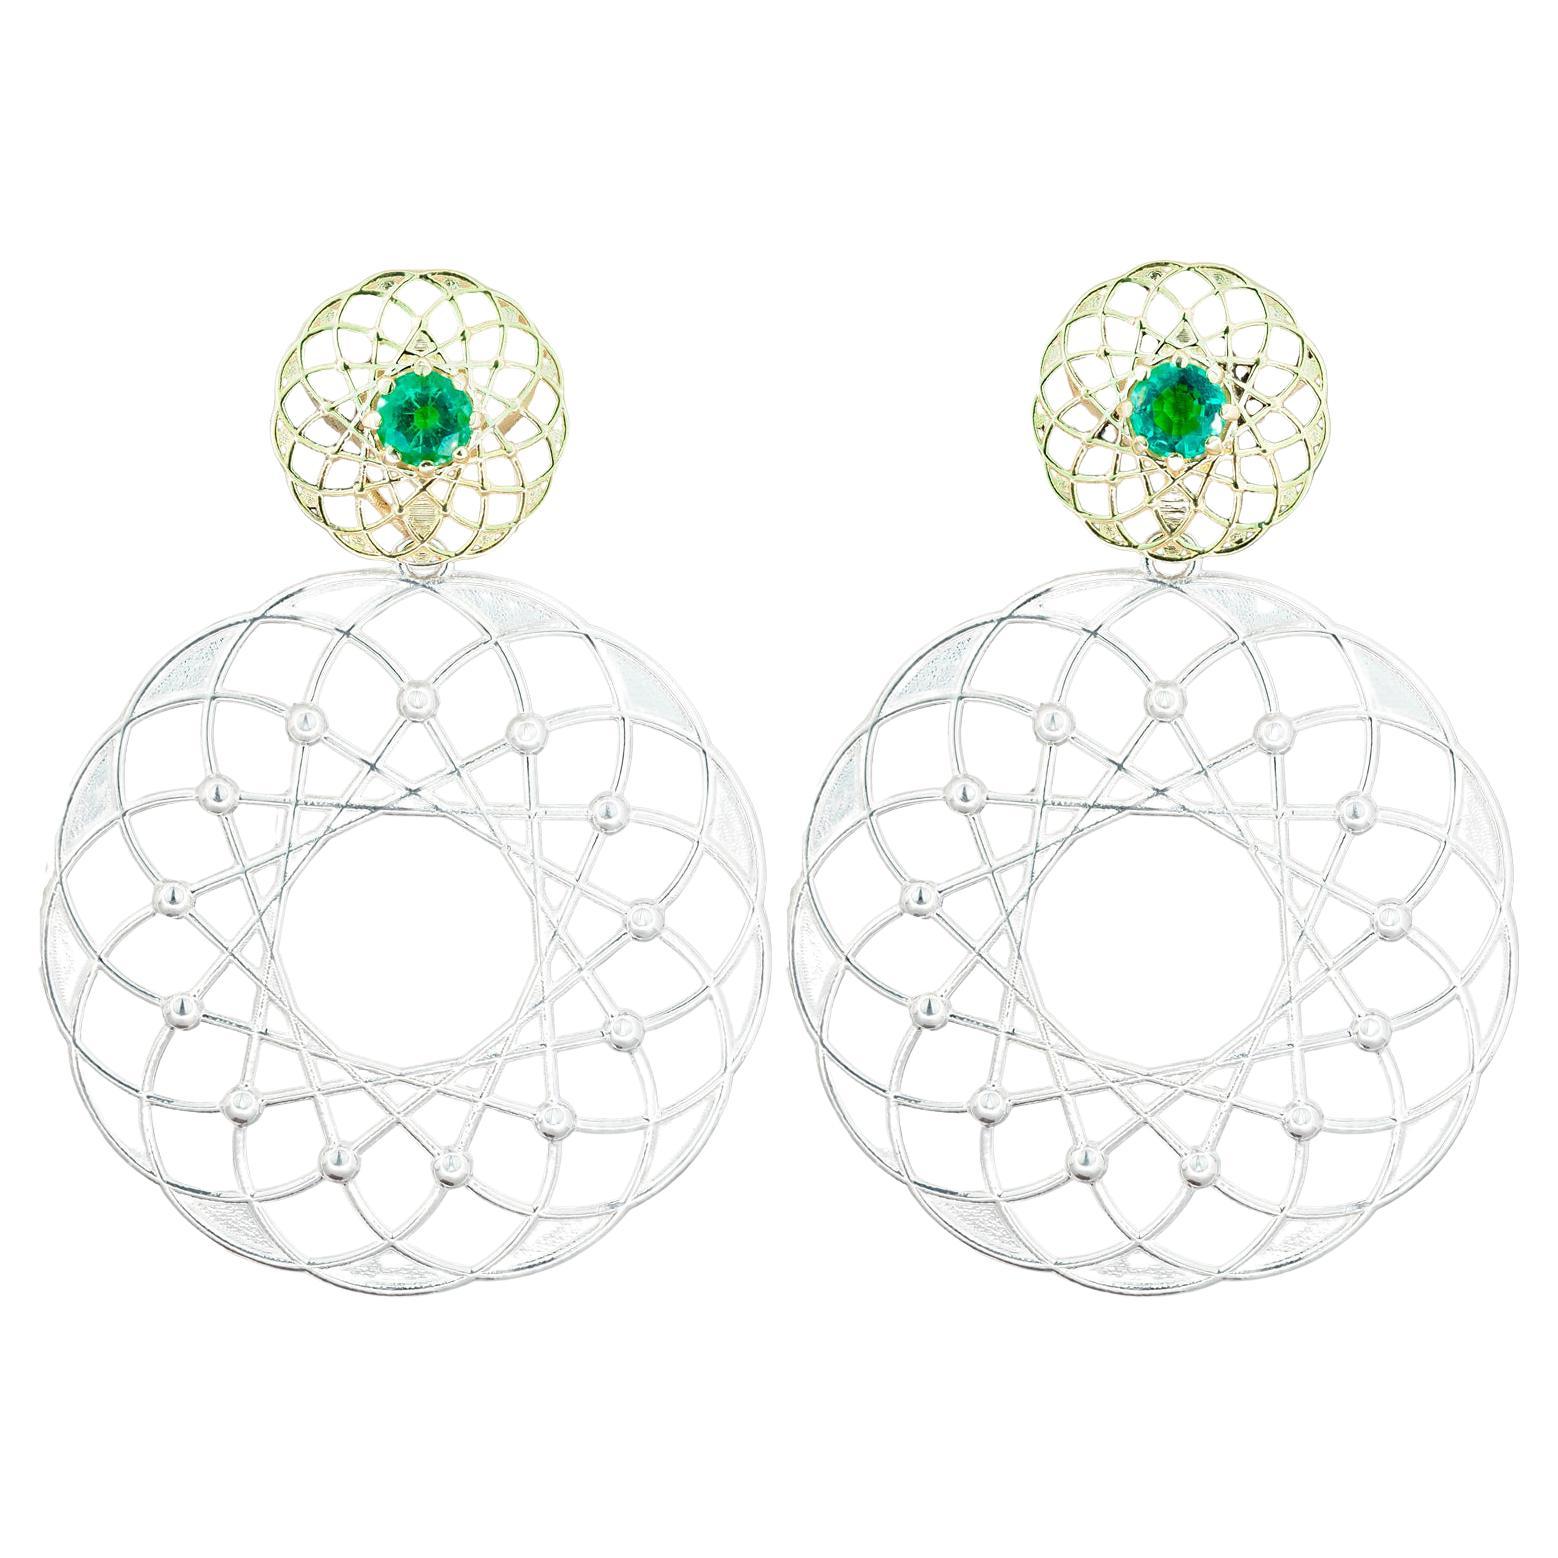 Emerald earrings. Gold and Silver Transformable Earrings Studs with Emeralds